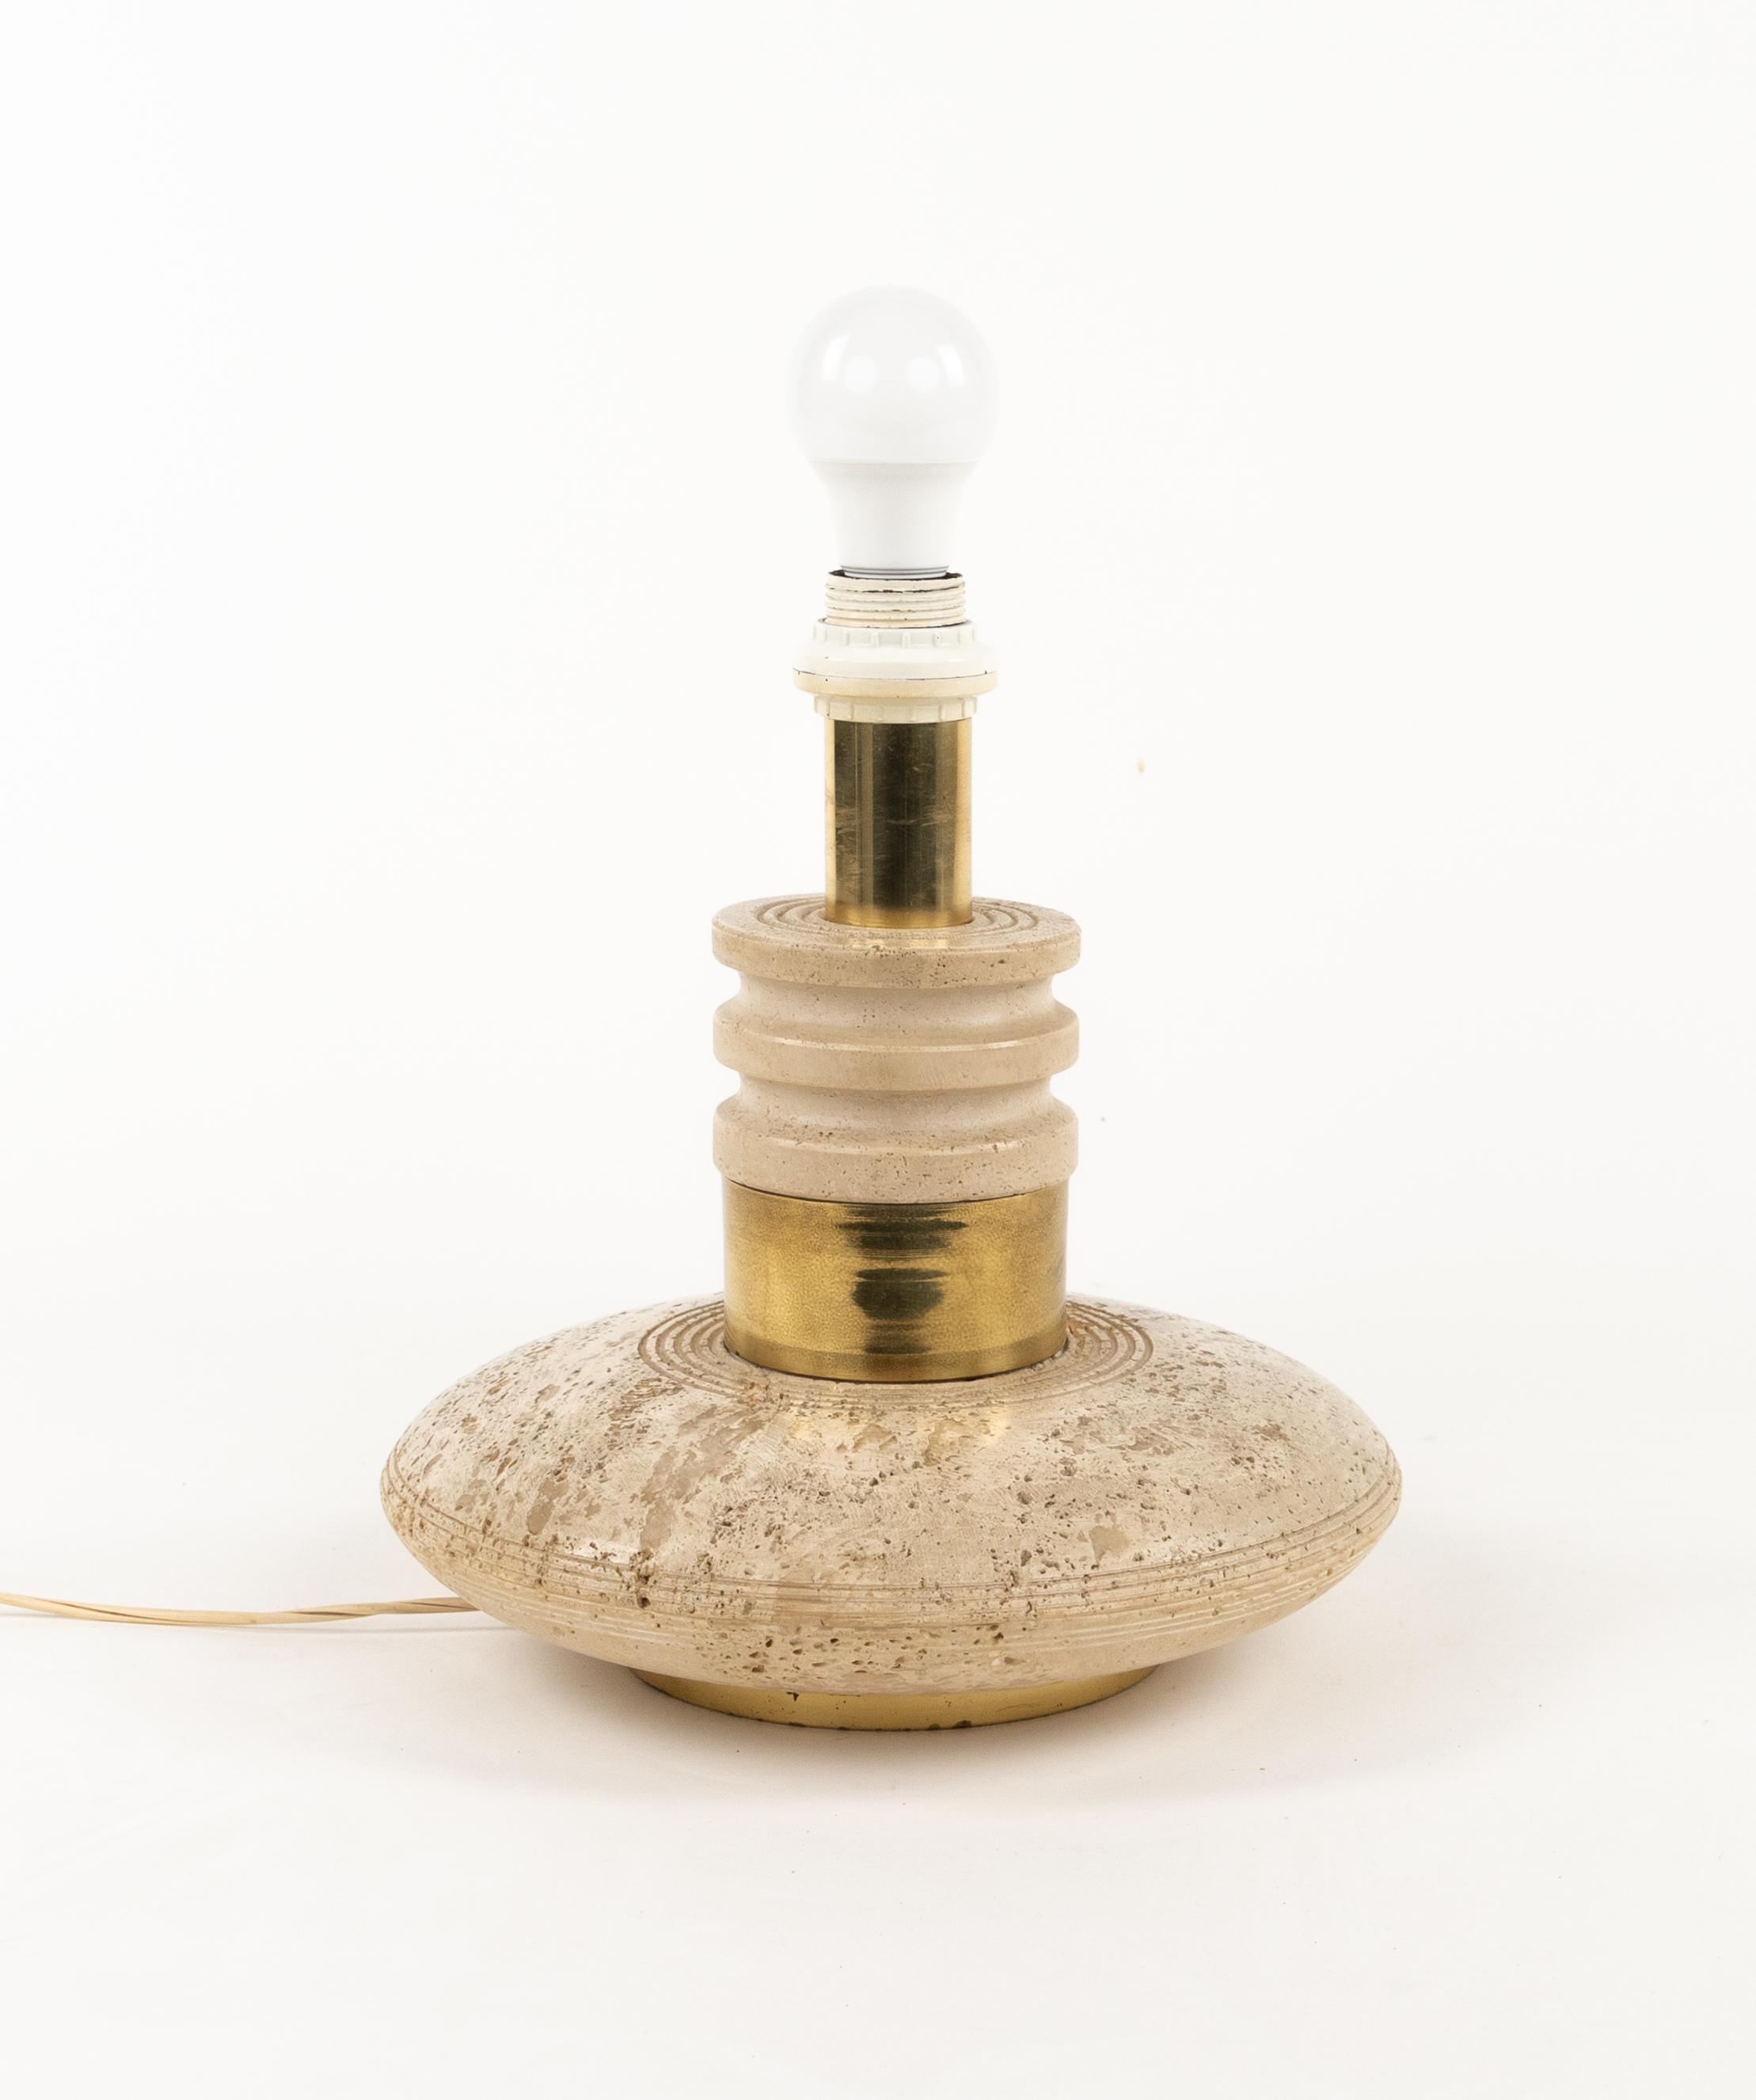 Midcentury amazing table lamp in travertine and brass in the style of Fratelli Mannelli.

Made in Italy in the 1970s.

A beautiful lamp that is perfectly working but most of all, it provides an amazing visual impact in every room. 

European plug